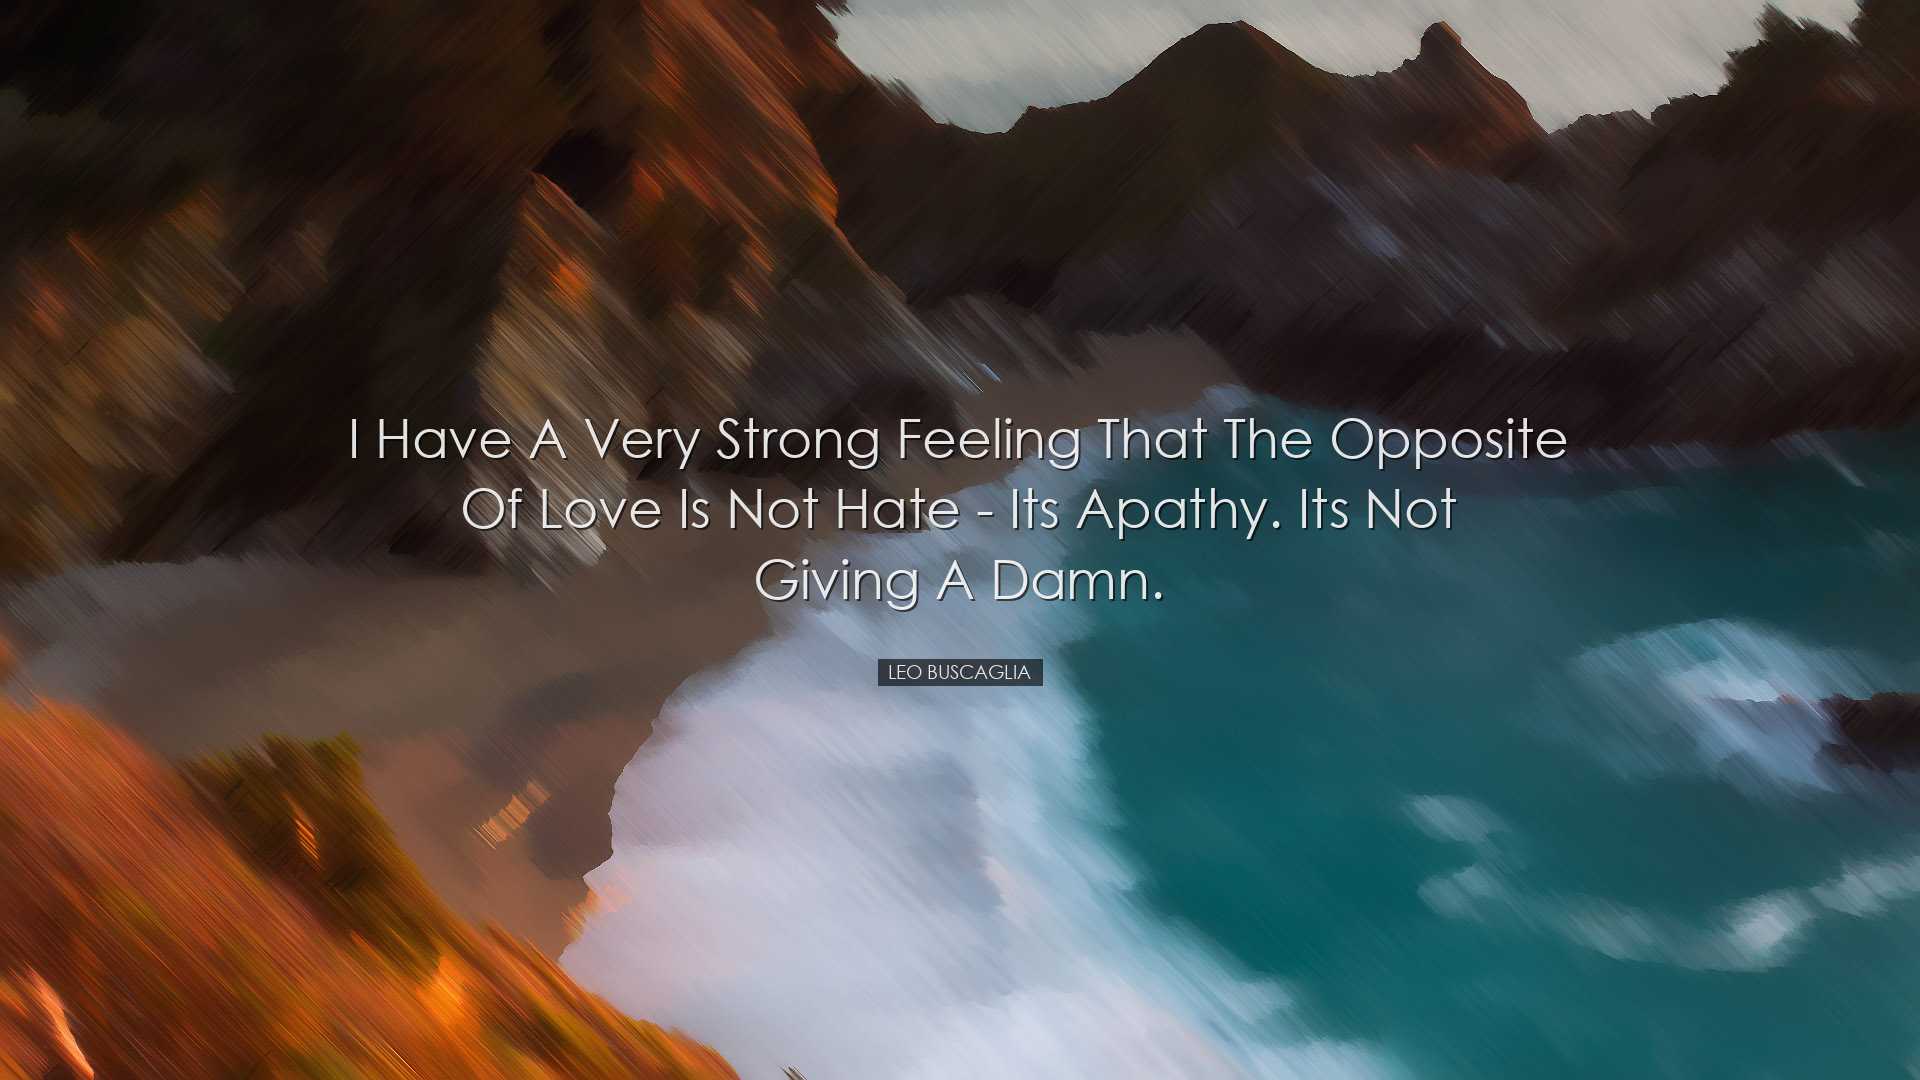 I have a very strong feeling that the opposite of love is not hate